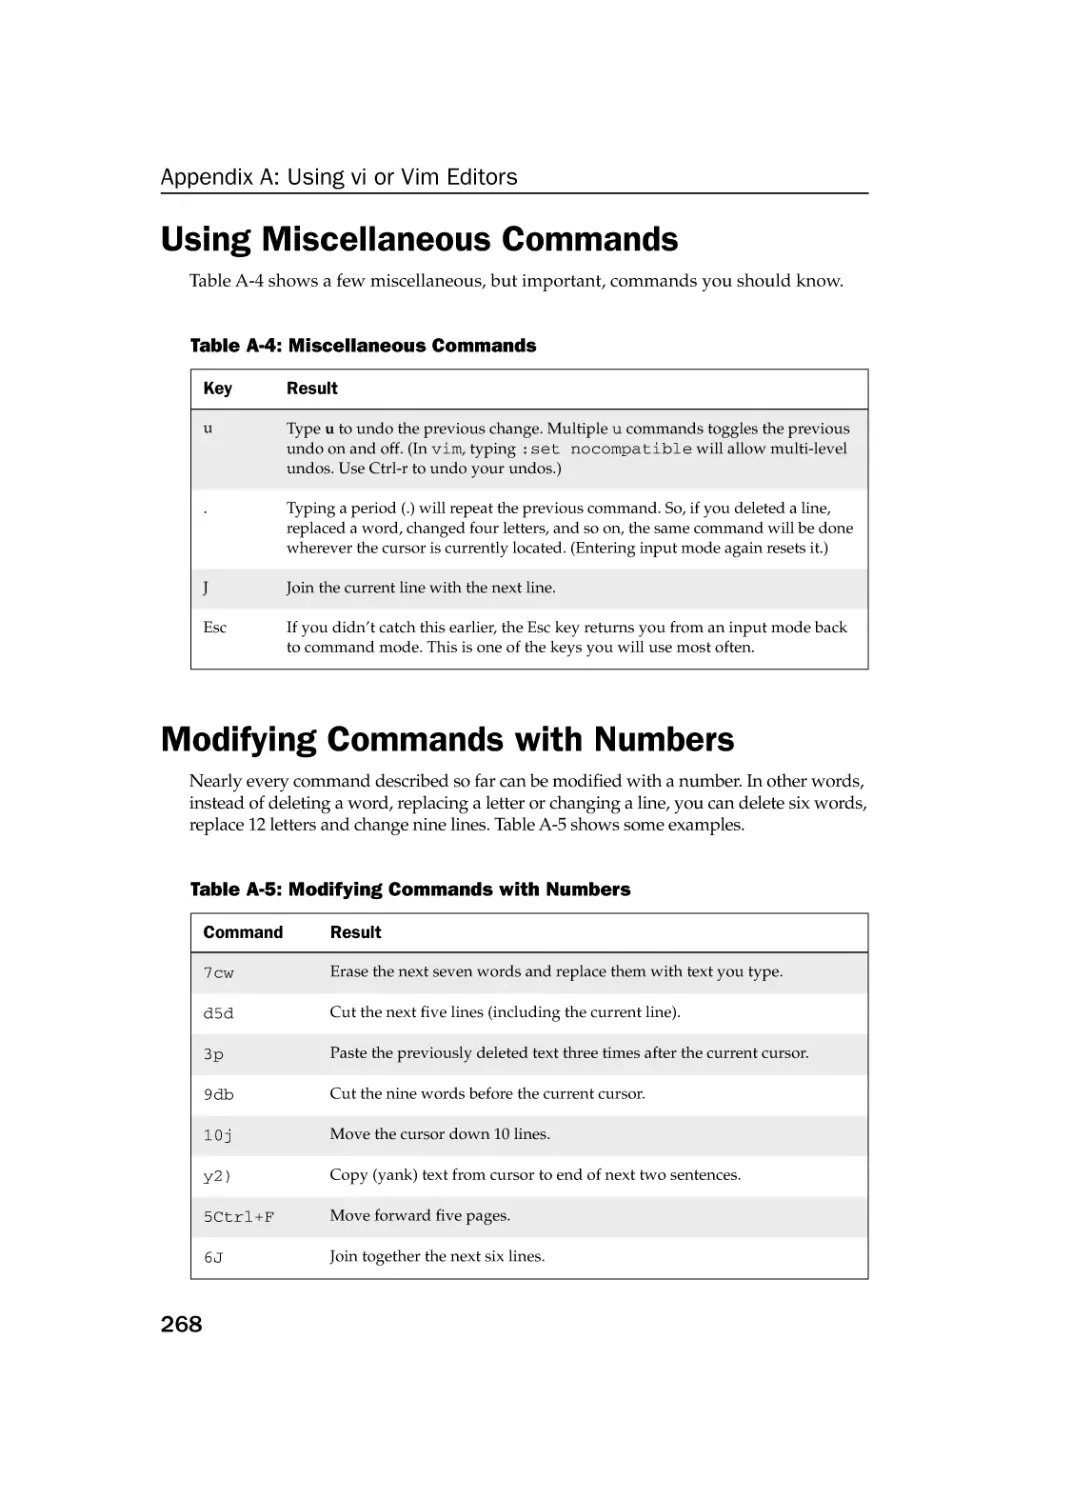 Using Miscellaneous Commands
Modifying Commands with Numbers